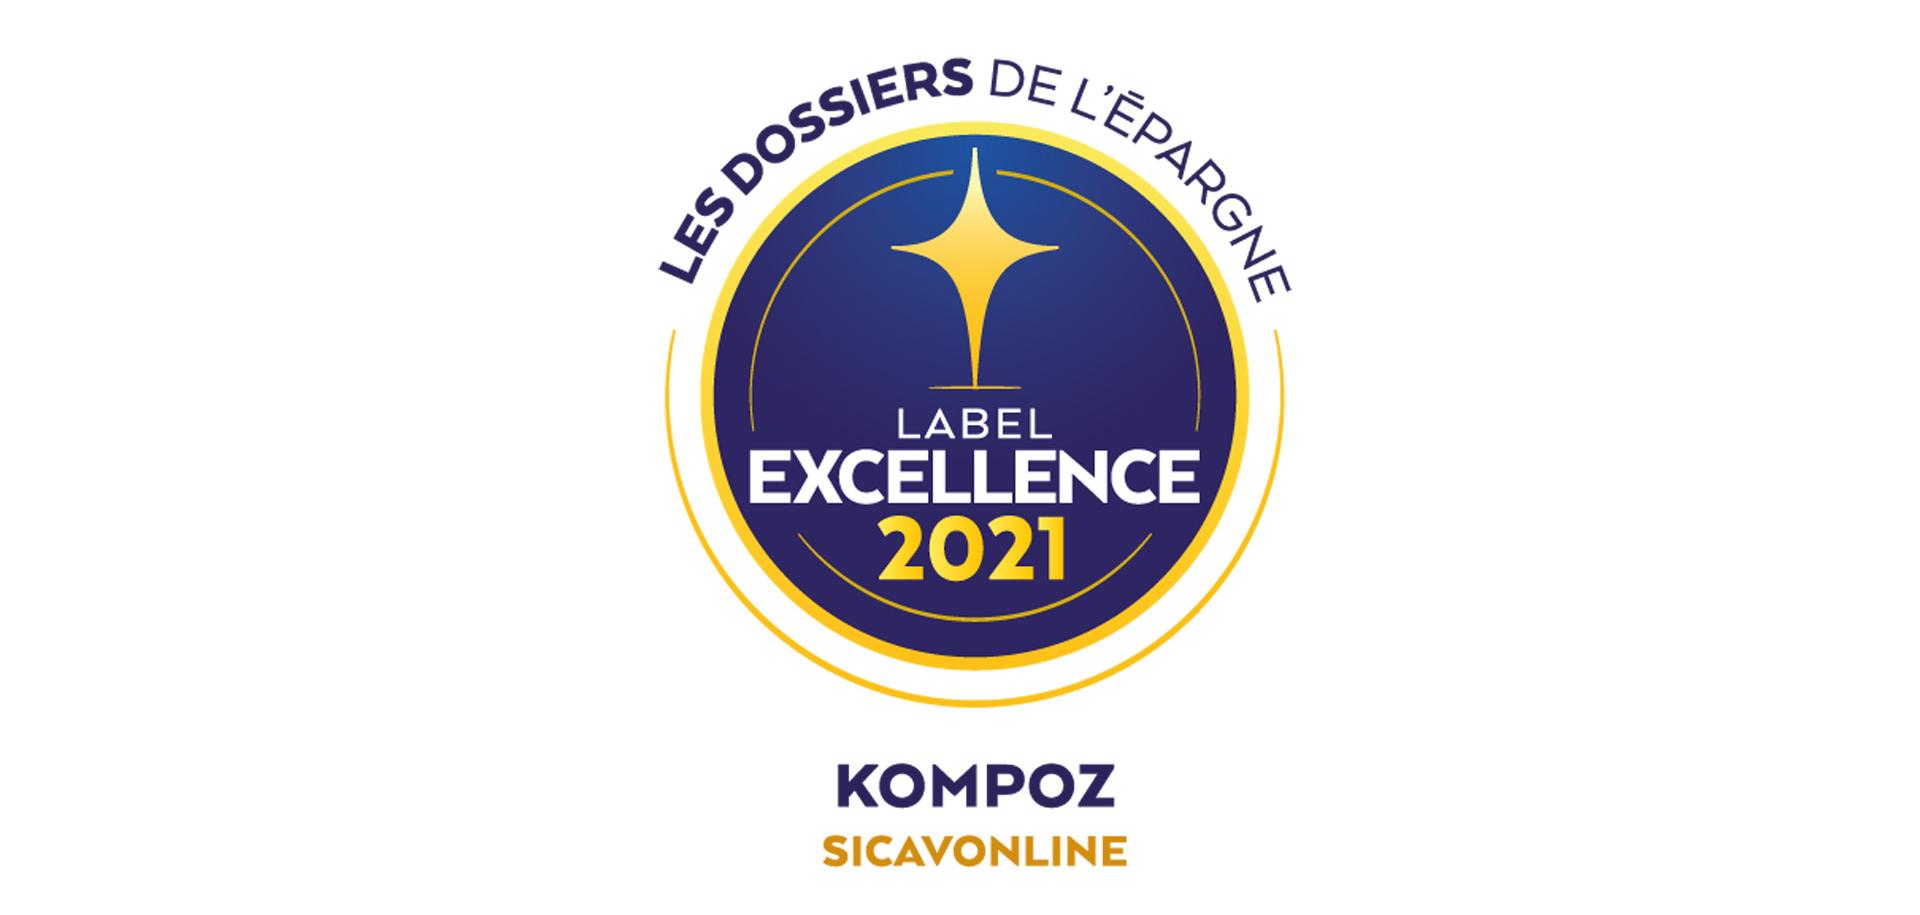 Kompoz received several recognitions, amongst which the 2021 excellence label of ‘Les Dossiers de l’Epargne’.